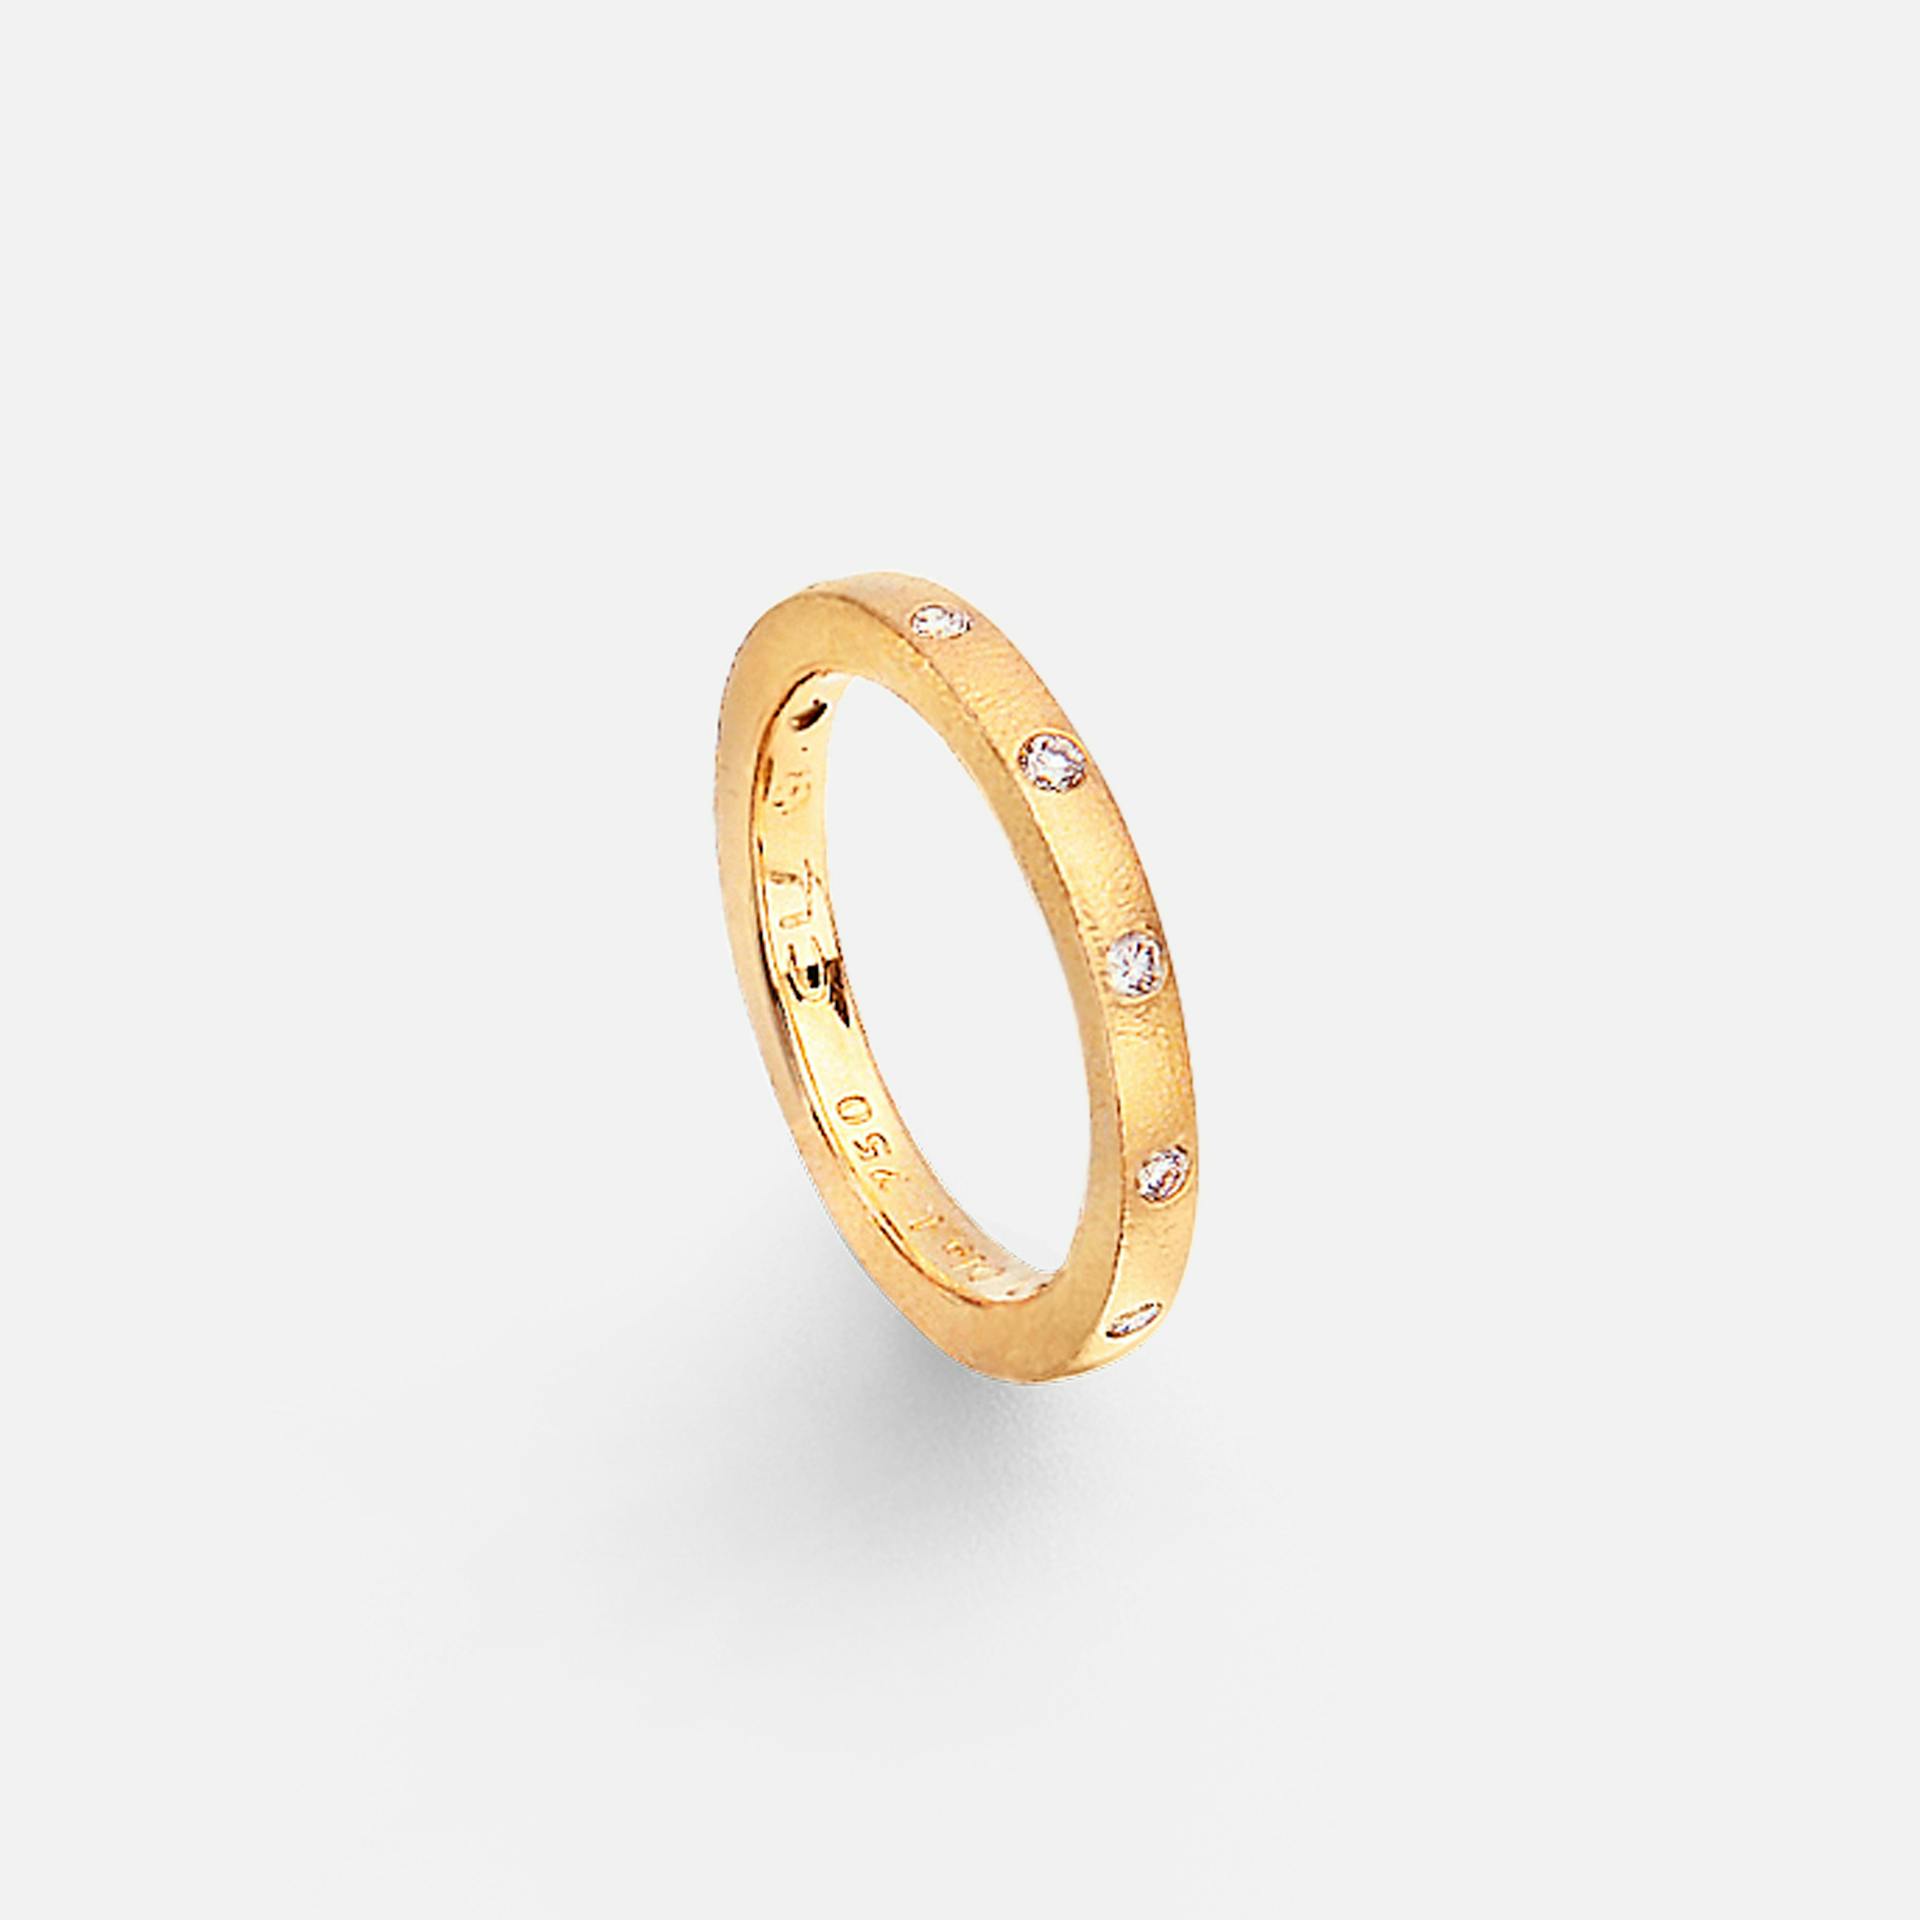 Forever Love Ring in Textured Yellow Gold with Diamonds  |  Ole Lynggaard Copenhagen